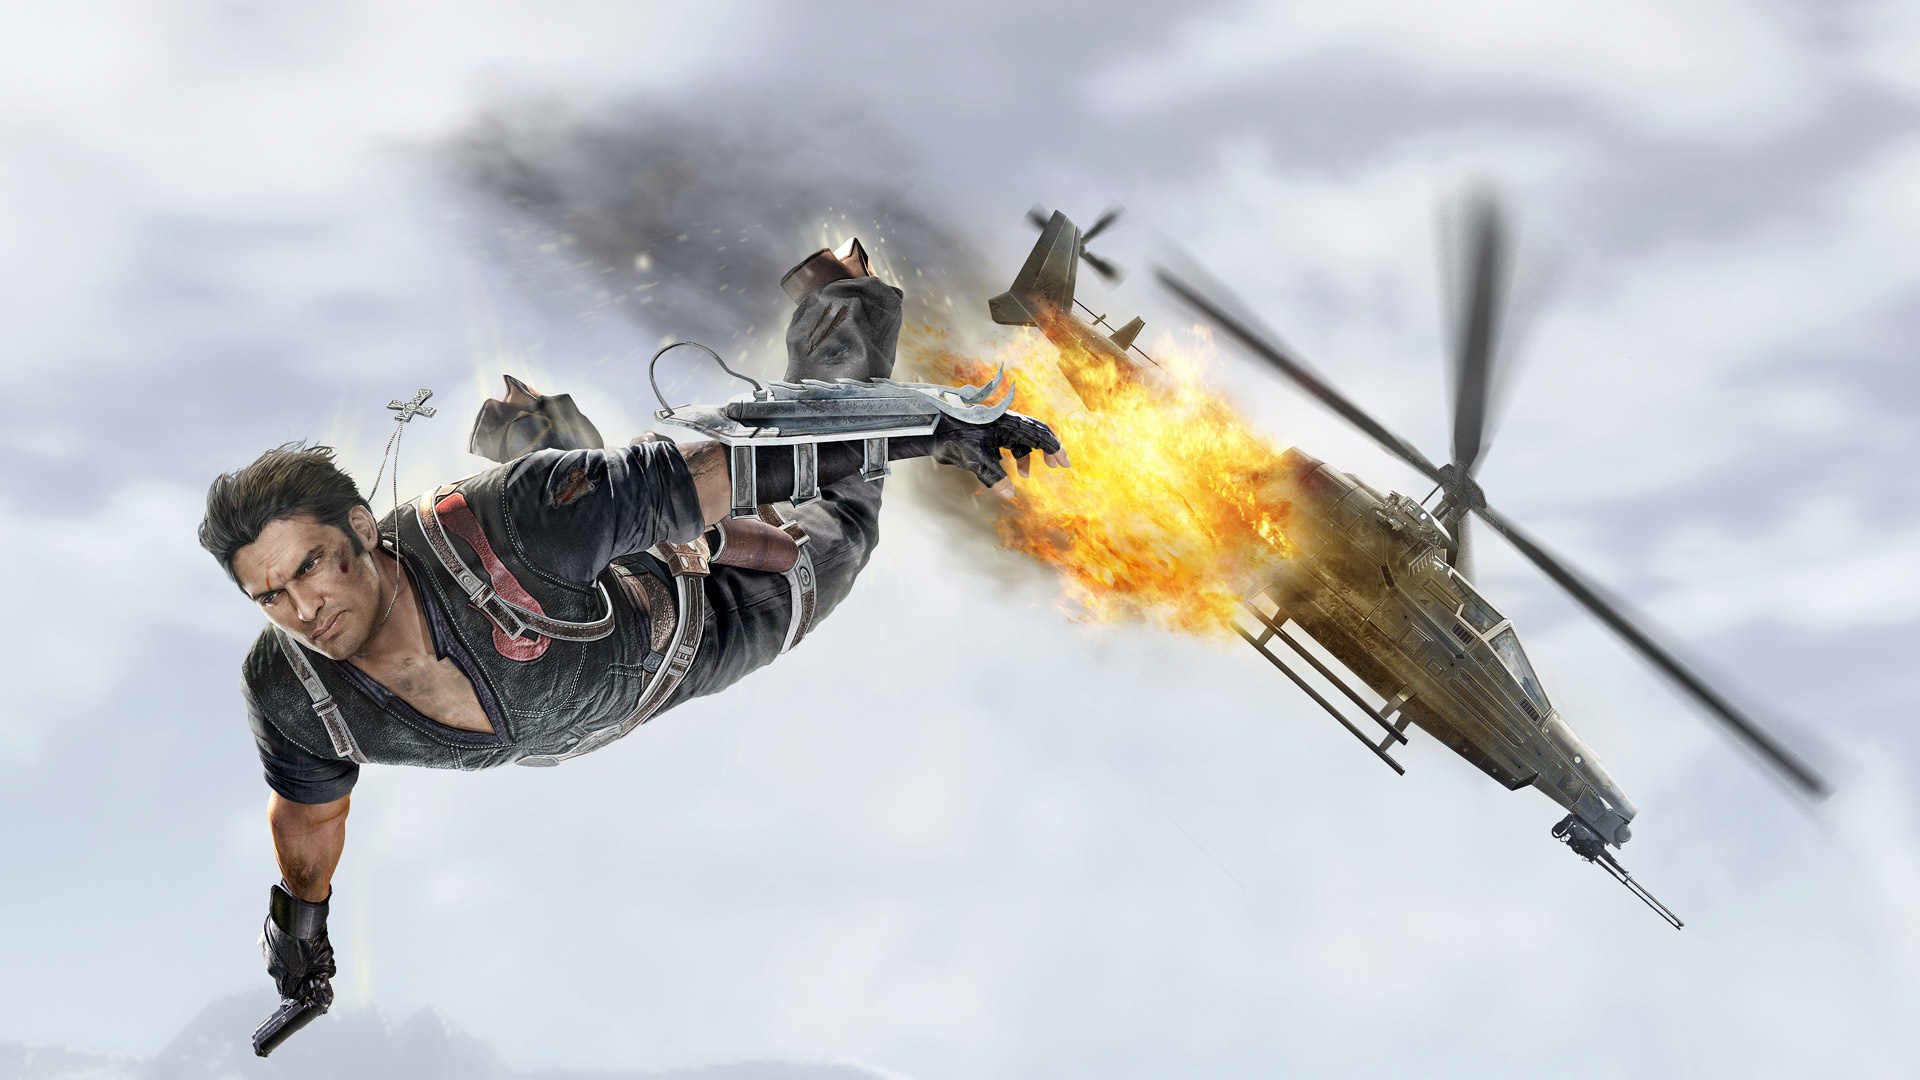 Just Cause gaming, Chaos unleashed, Rico Rodriguez's adventure, Explosive gameplay, 1920x1080 Full HD Desktop